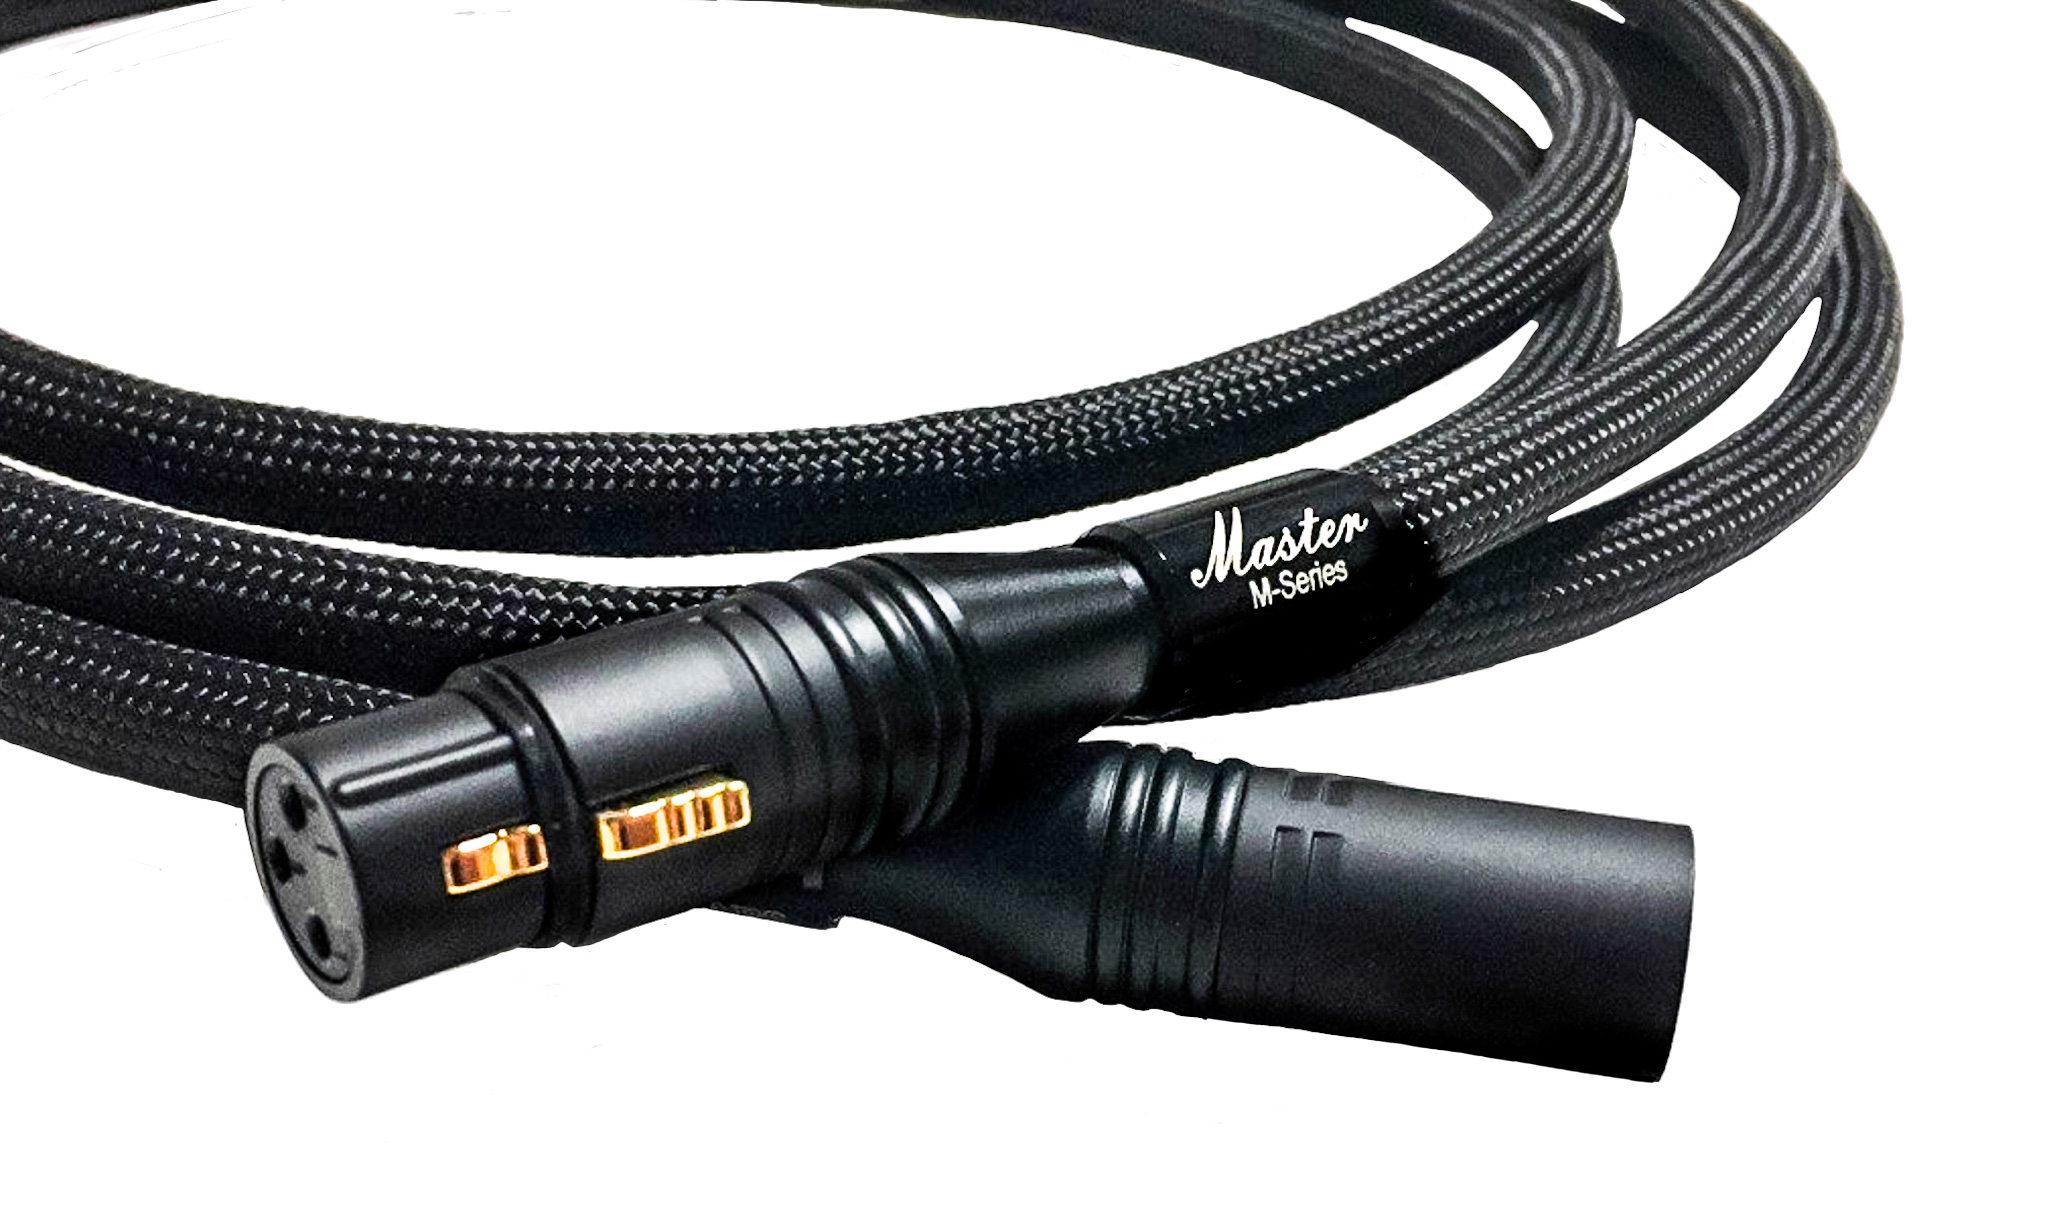 https://taralabs.com/wp-content/uploads/2023/03/The-Master-M-Series-Microphone-CableB.jpg